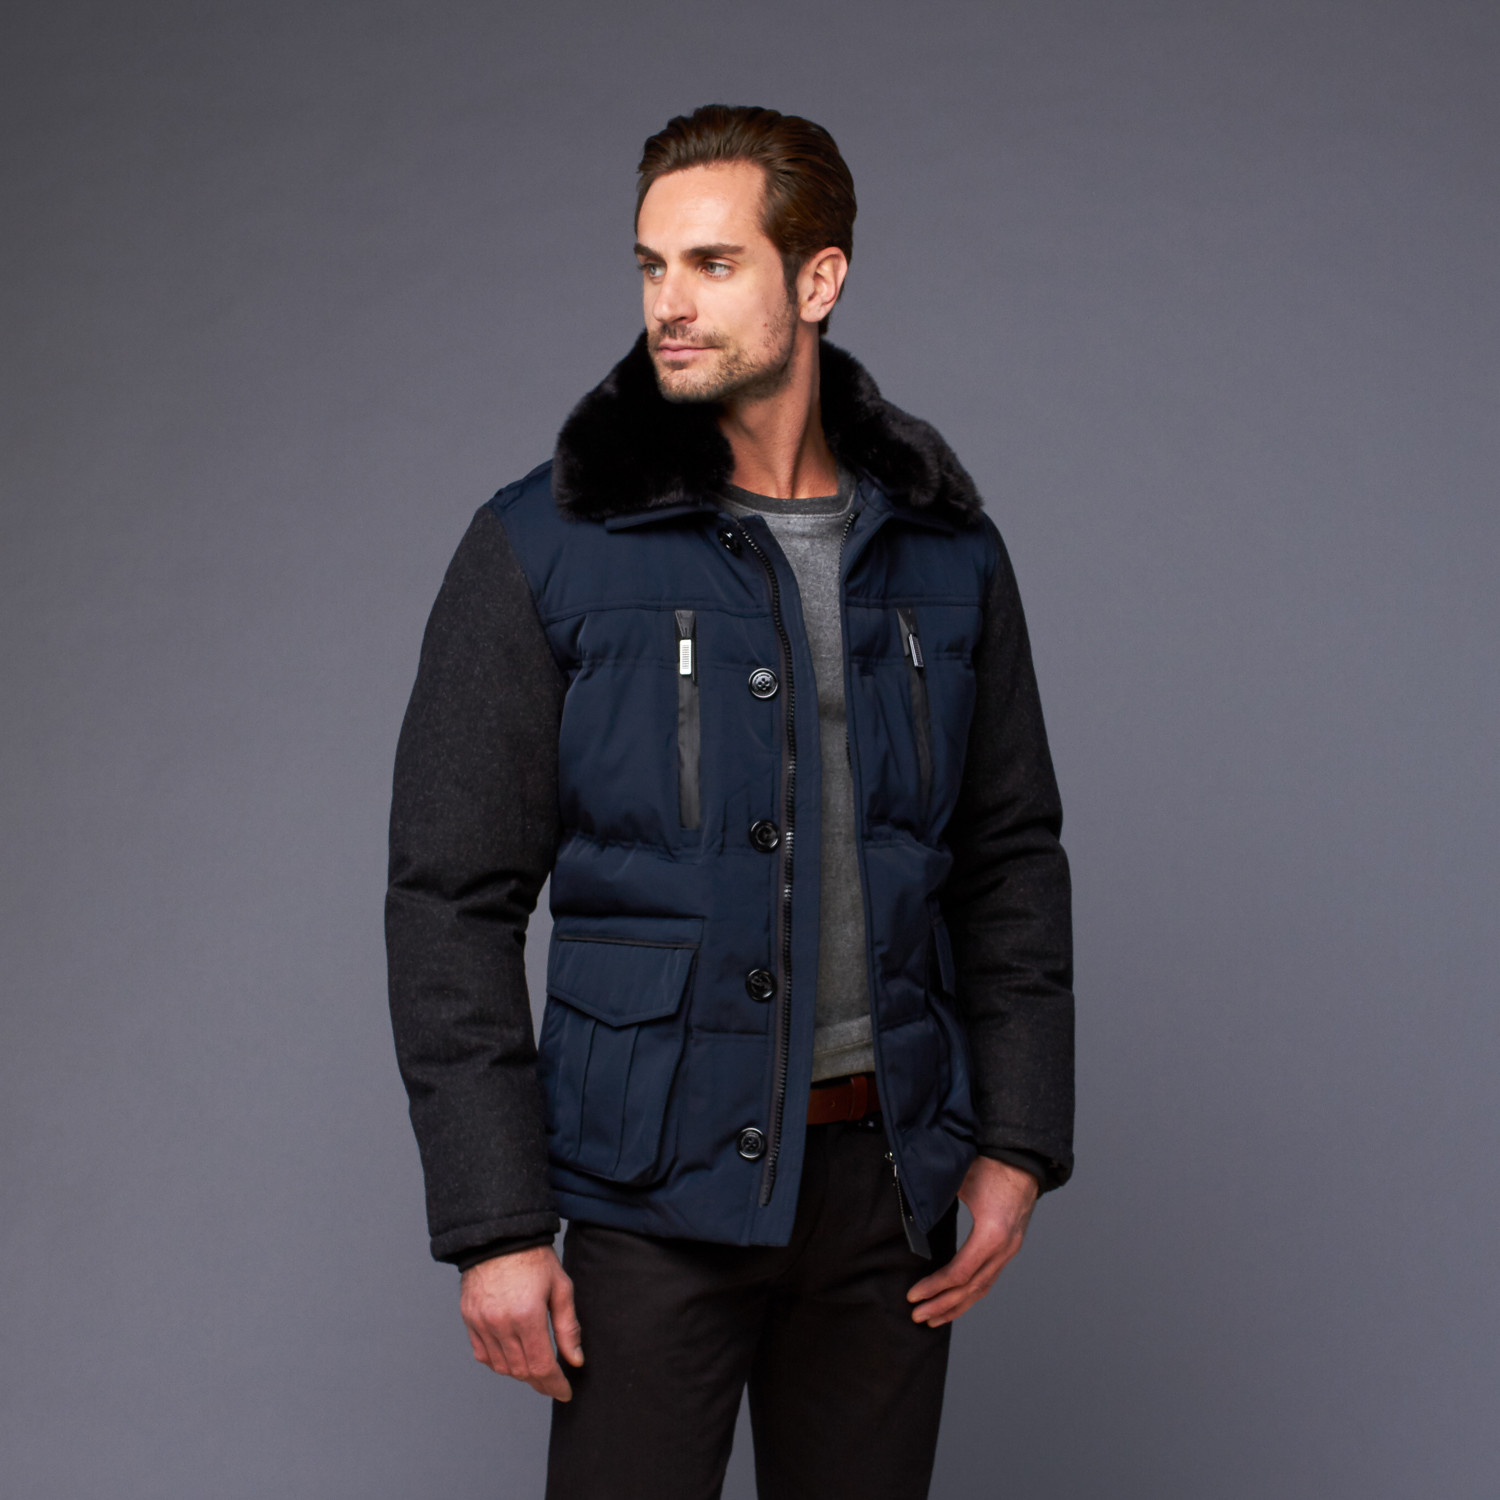 Lights of London // Piccadilly Circus Jacket // Dark Navy (S ...